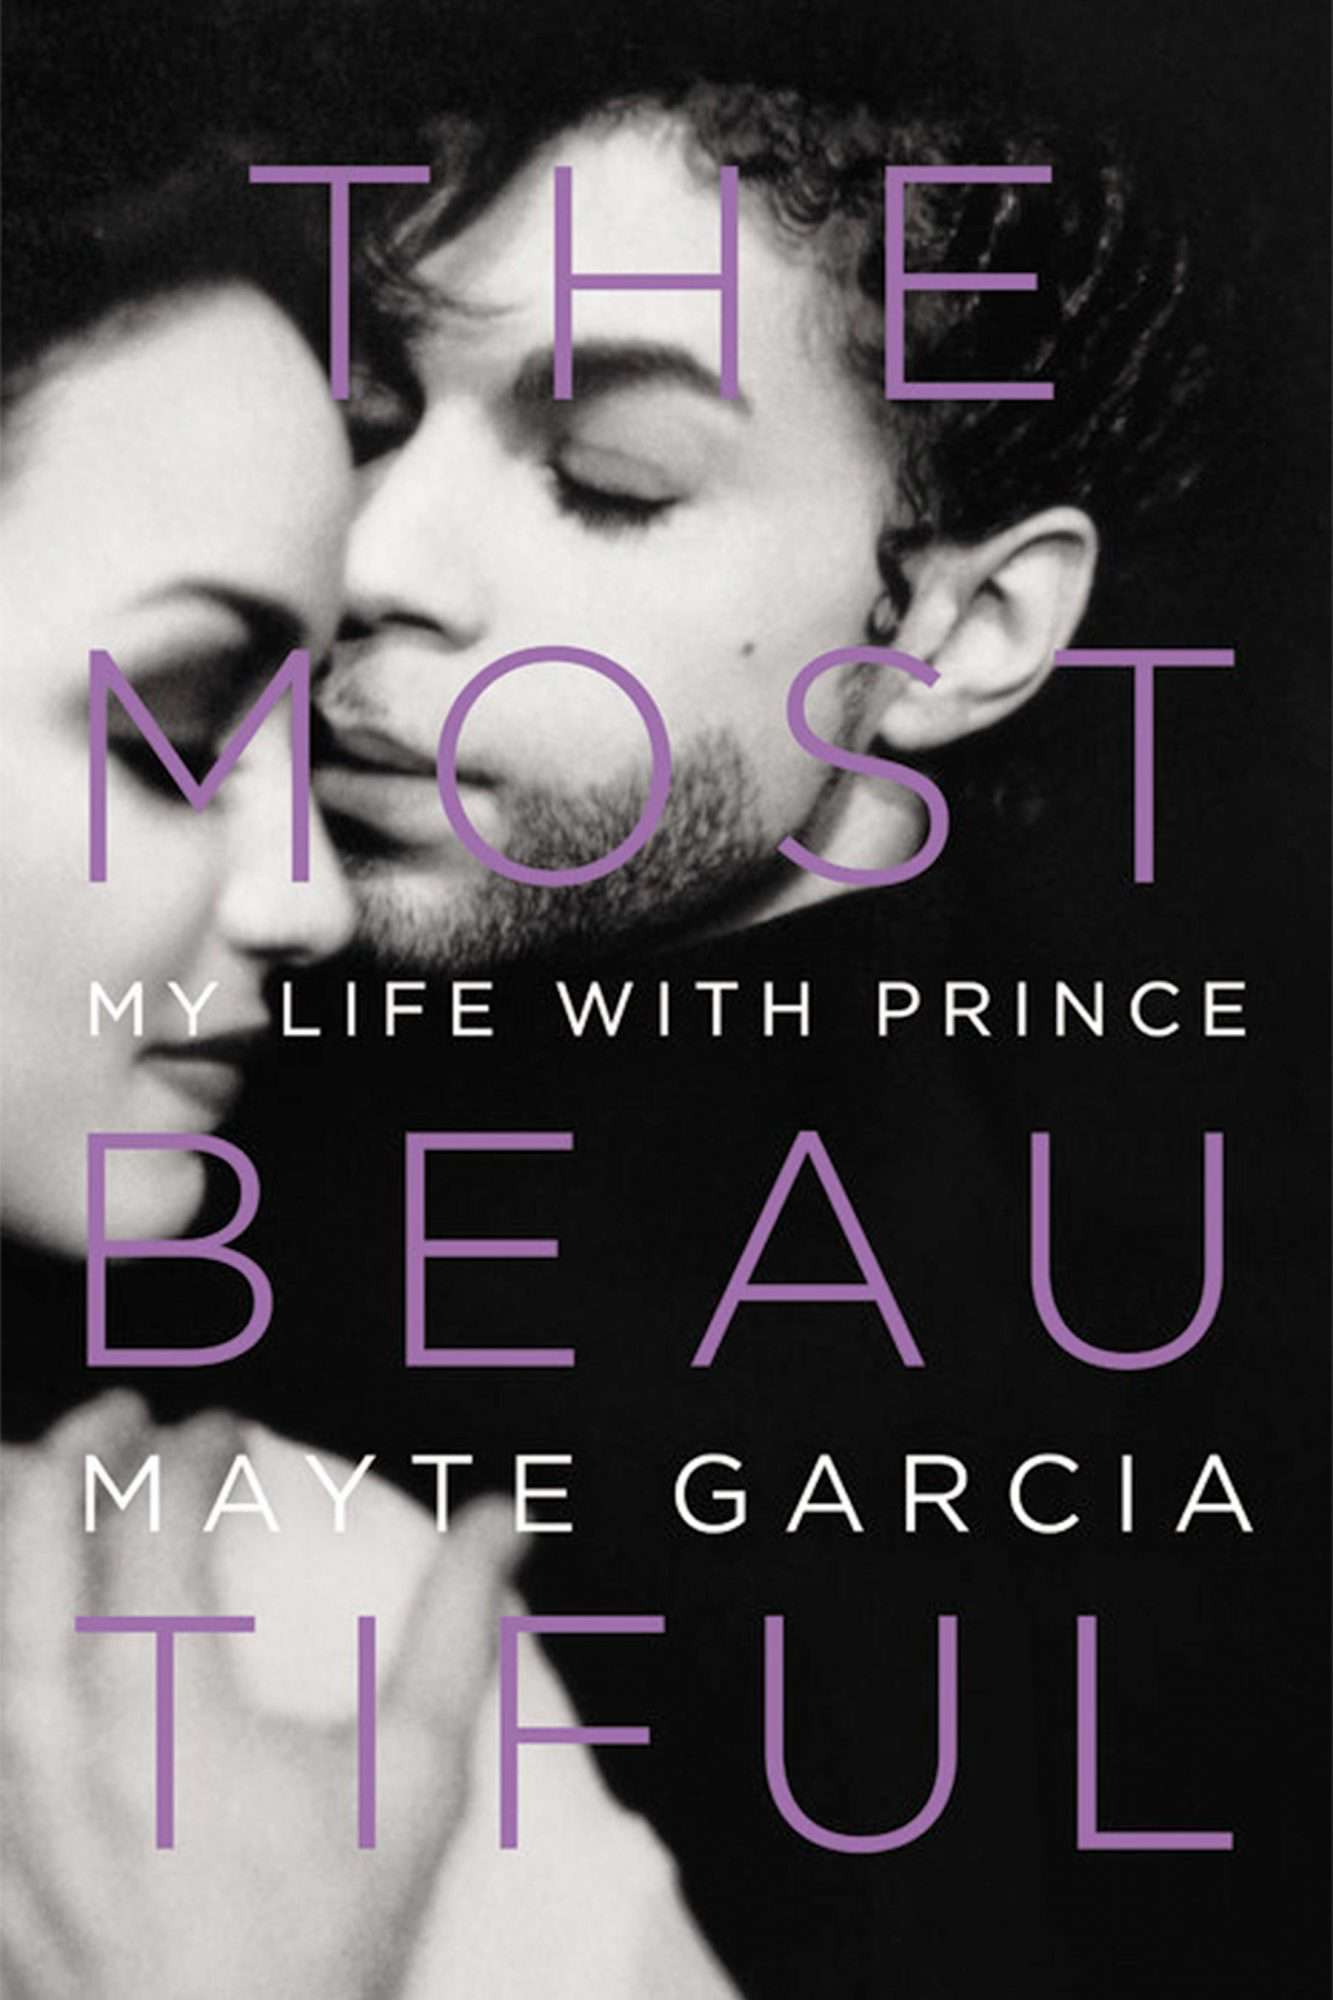 7. Mayte Garcia, The Most Beautiful: My Life with Prince